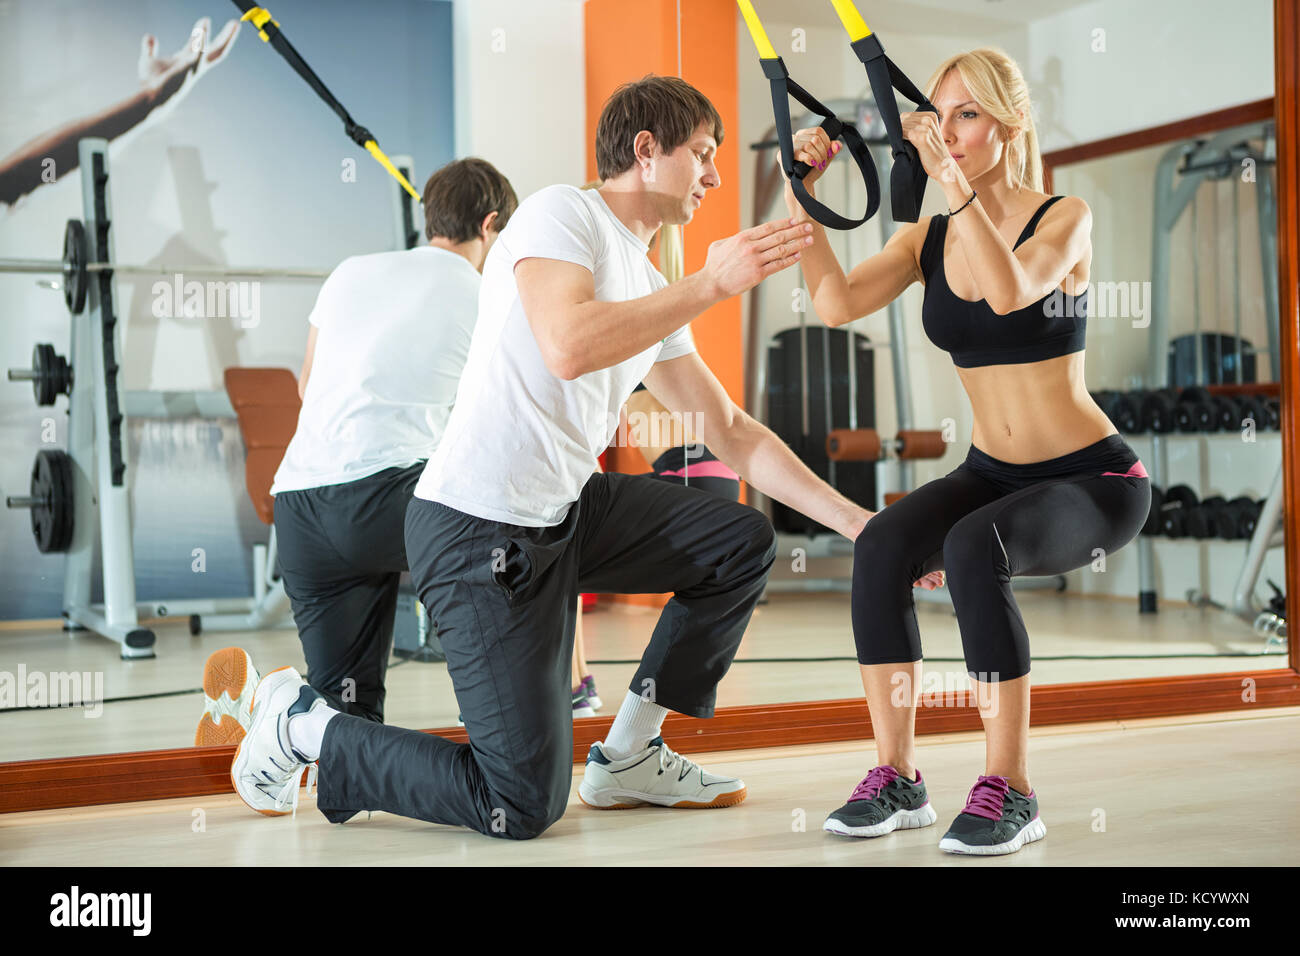 Woman doing workout with fitness straps under supervision an personal trainer Stock Photo